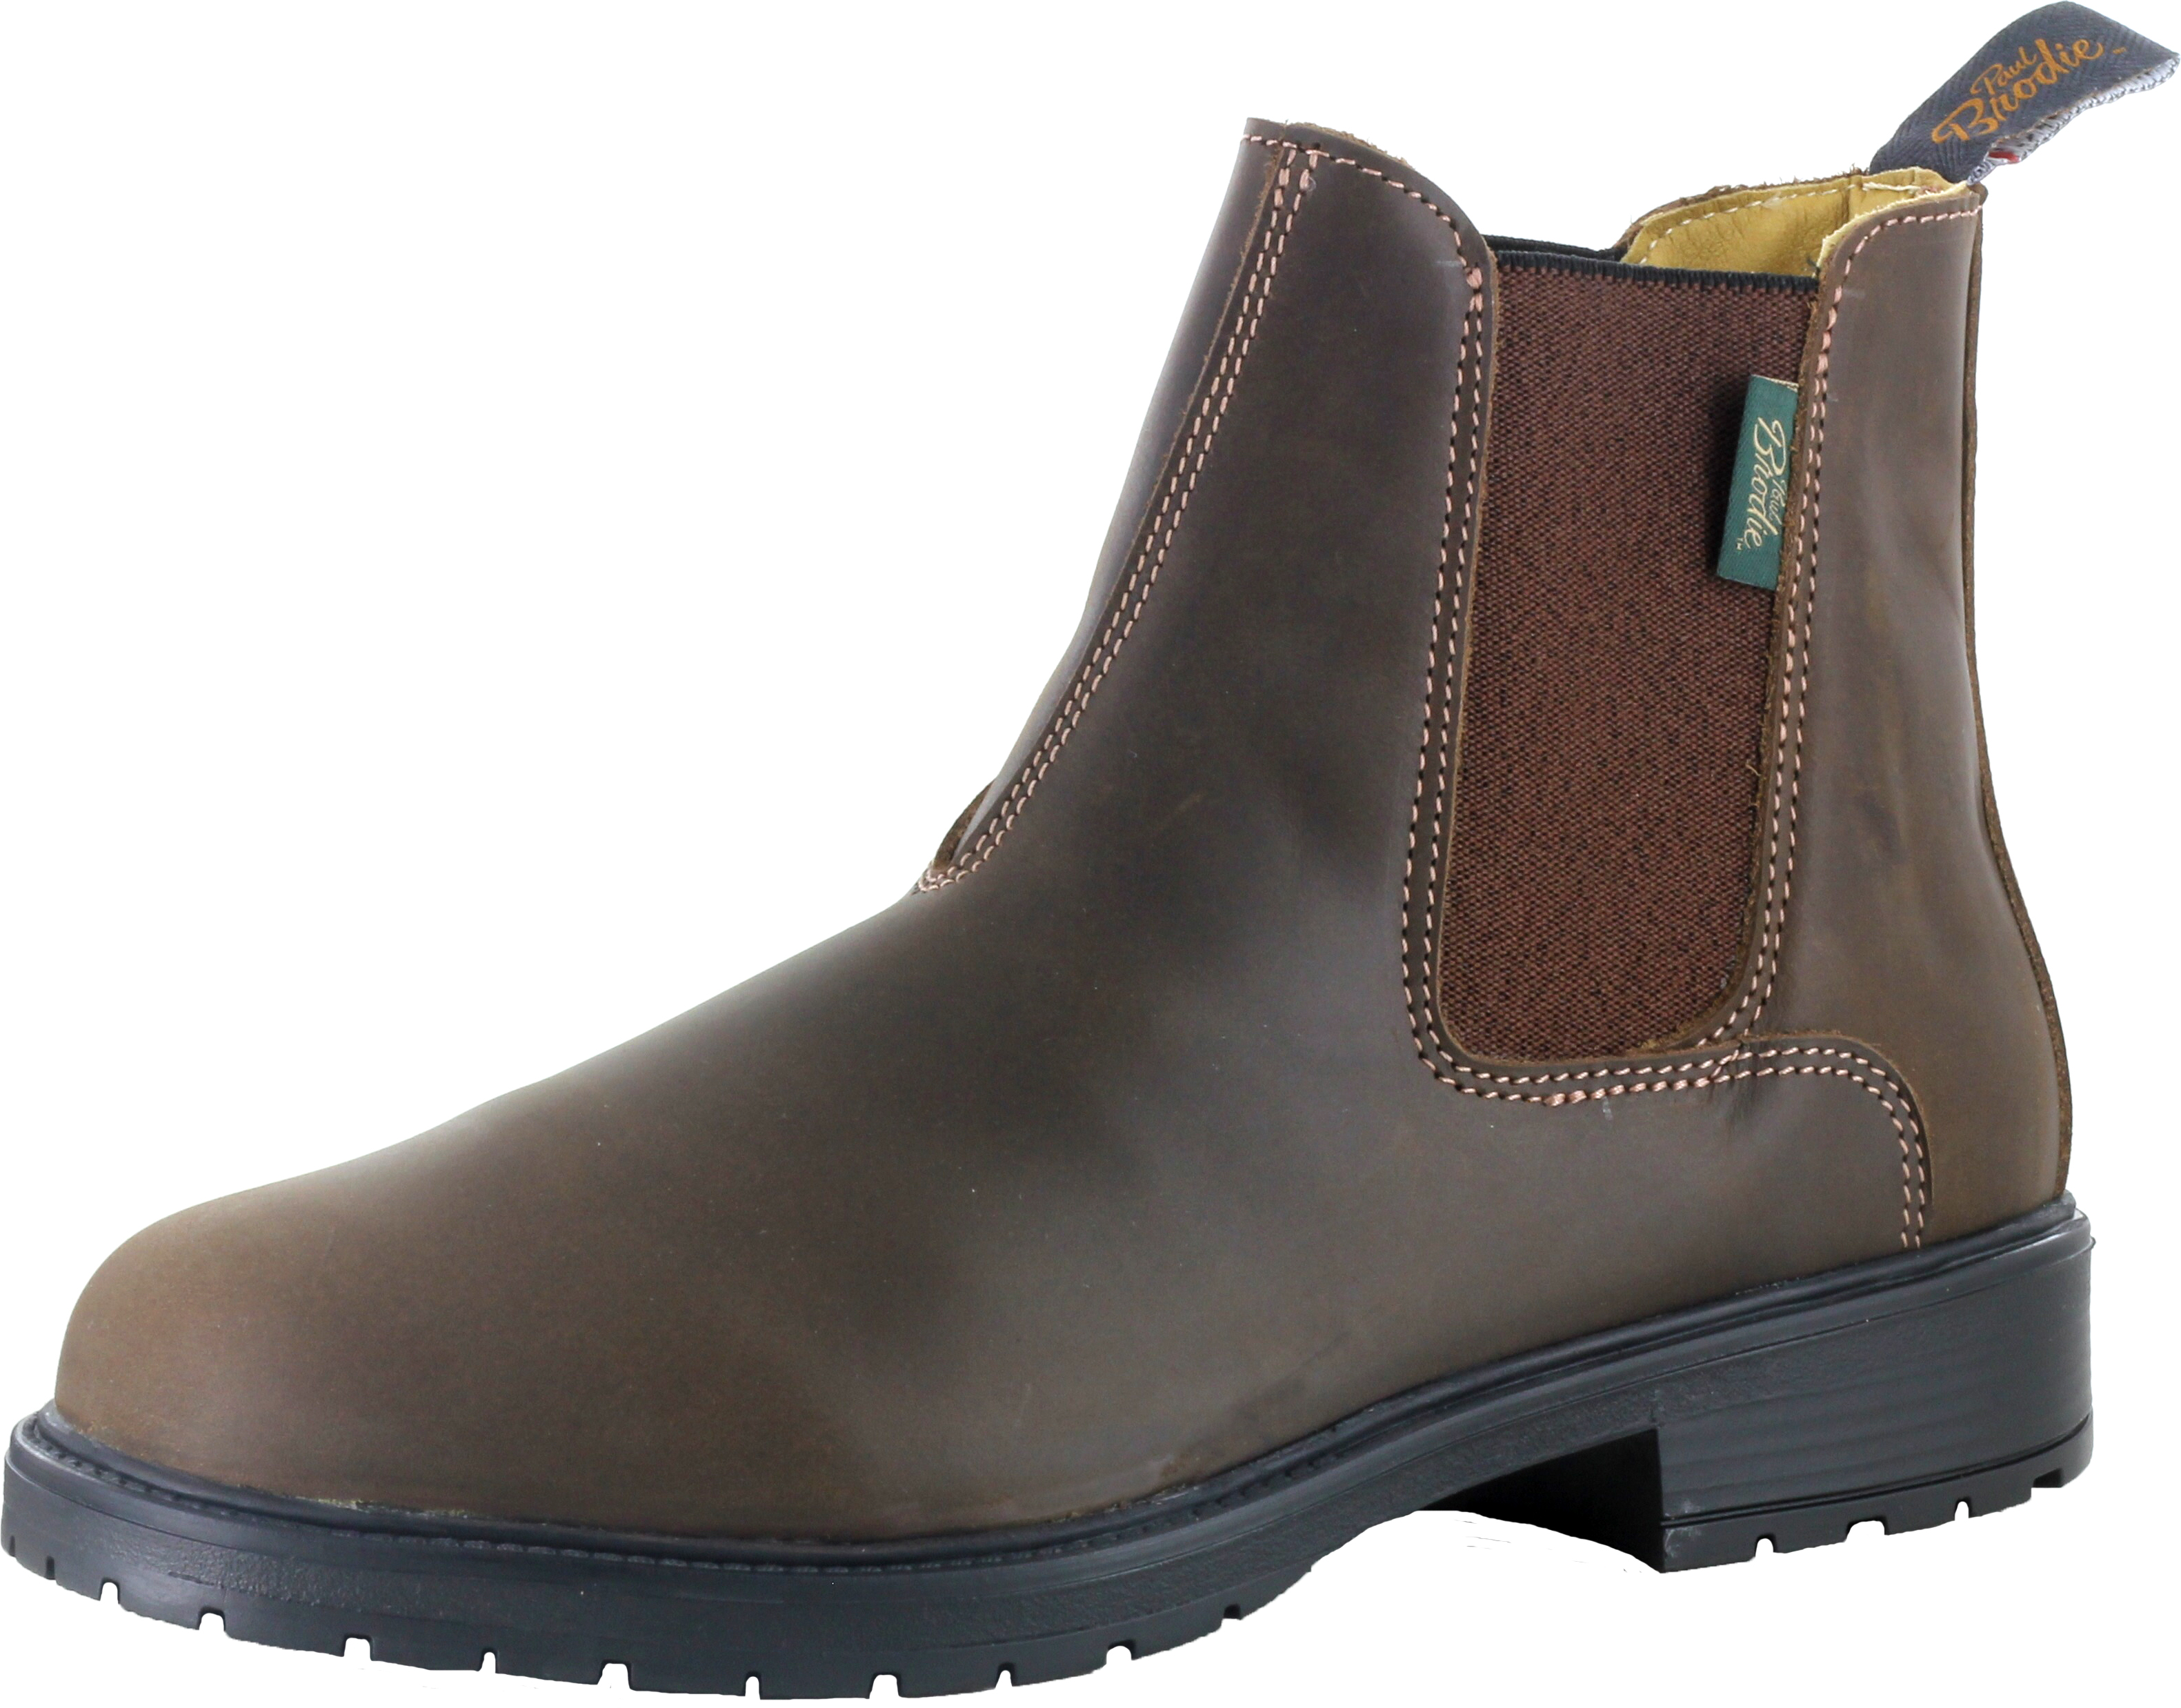 Paul Brodie Double Gore Boot - Crazy Horse Brown